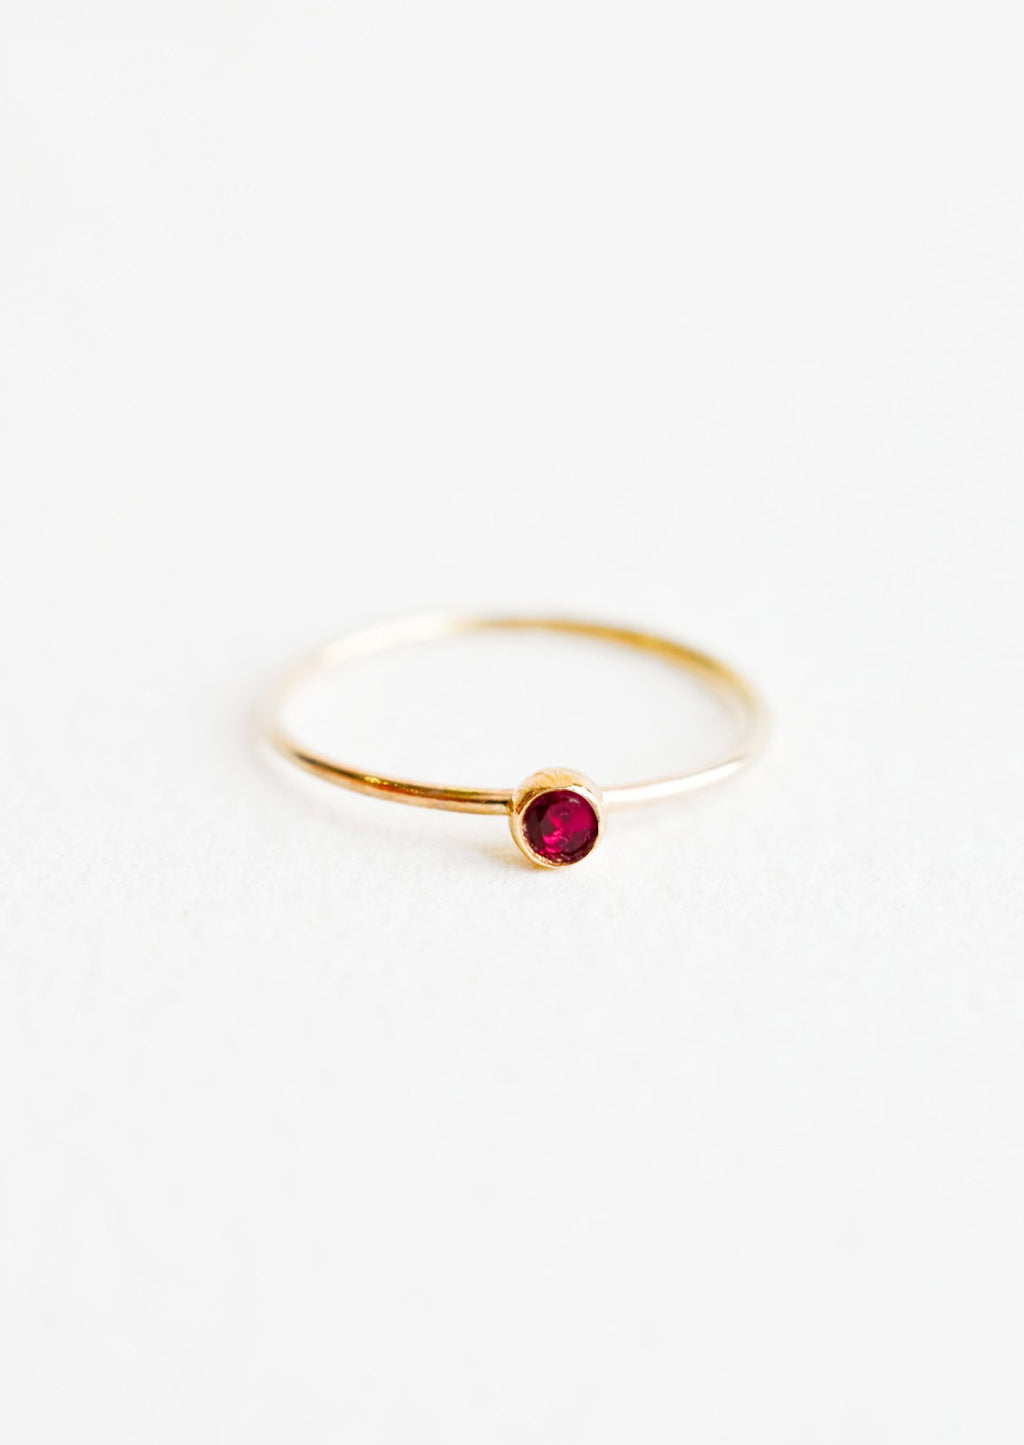 Garnet / Size 5: Yellow gold ring with slim band and small red garnet stone.